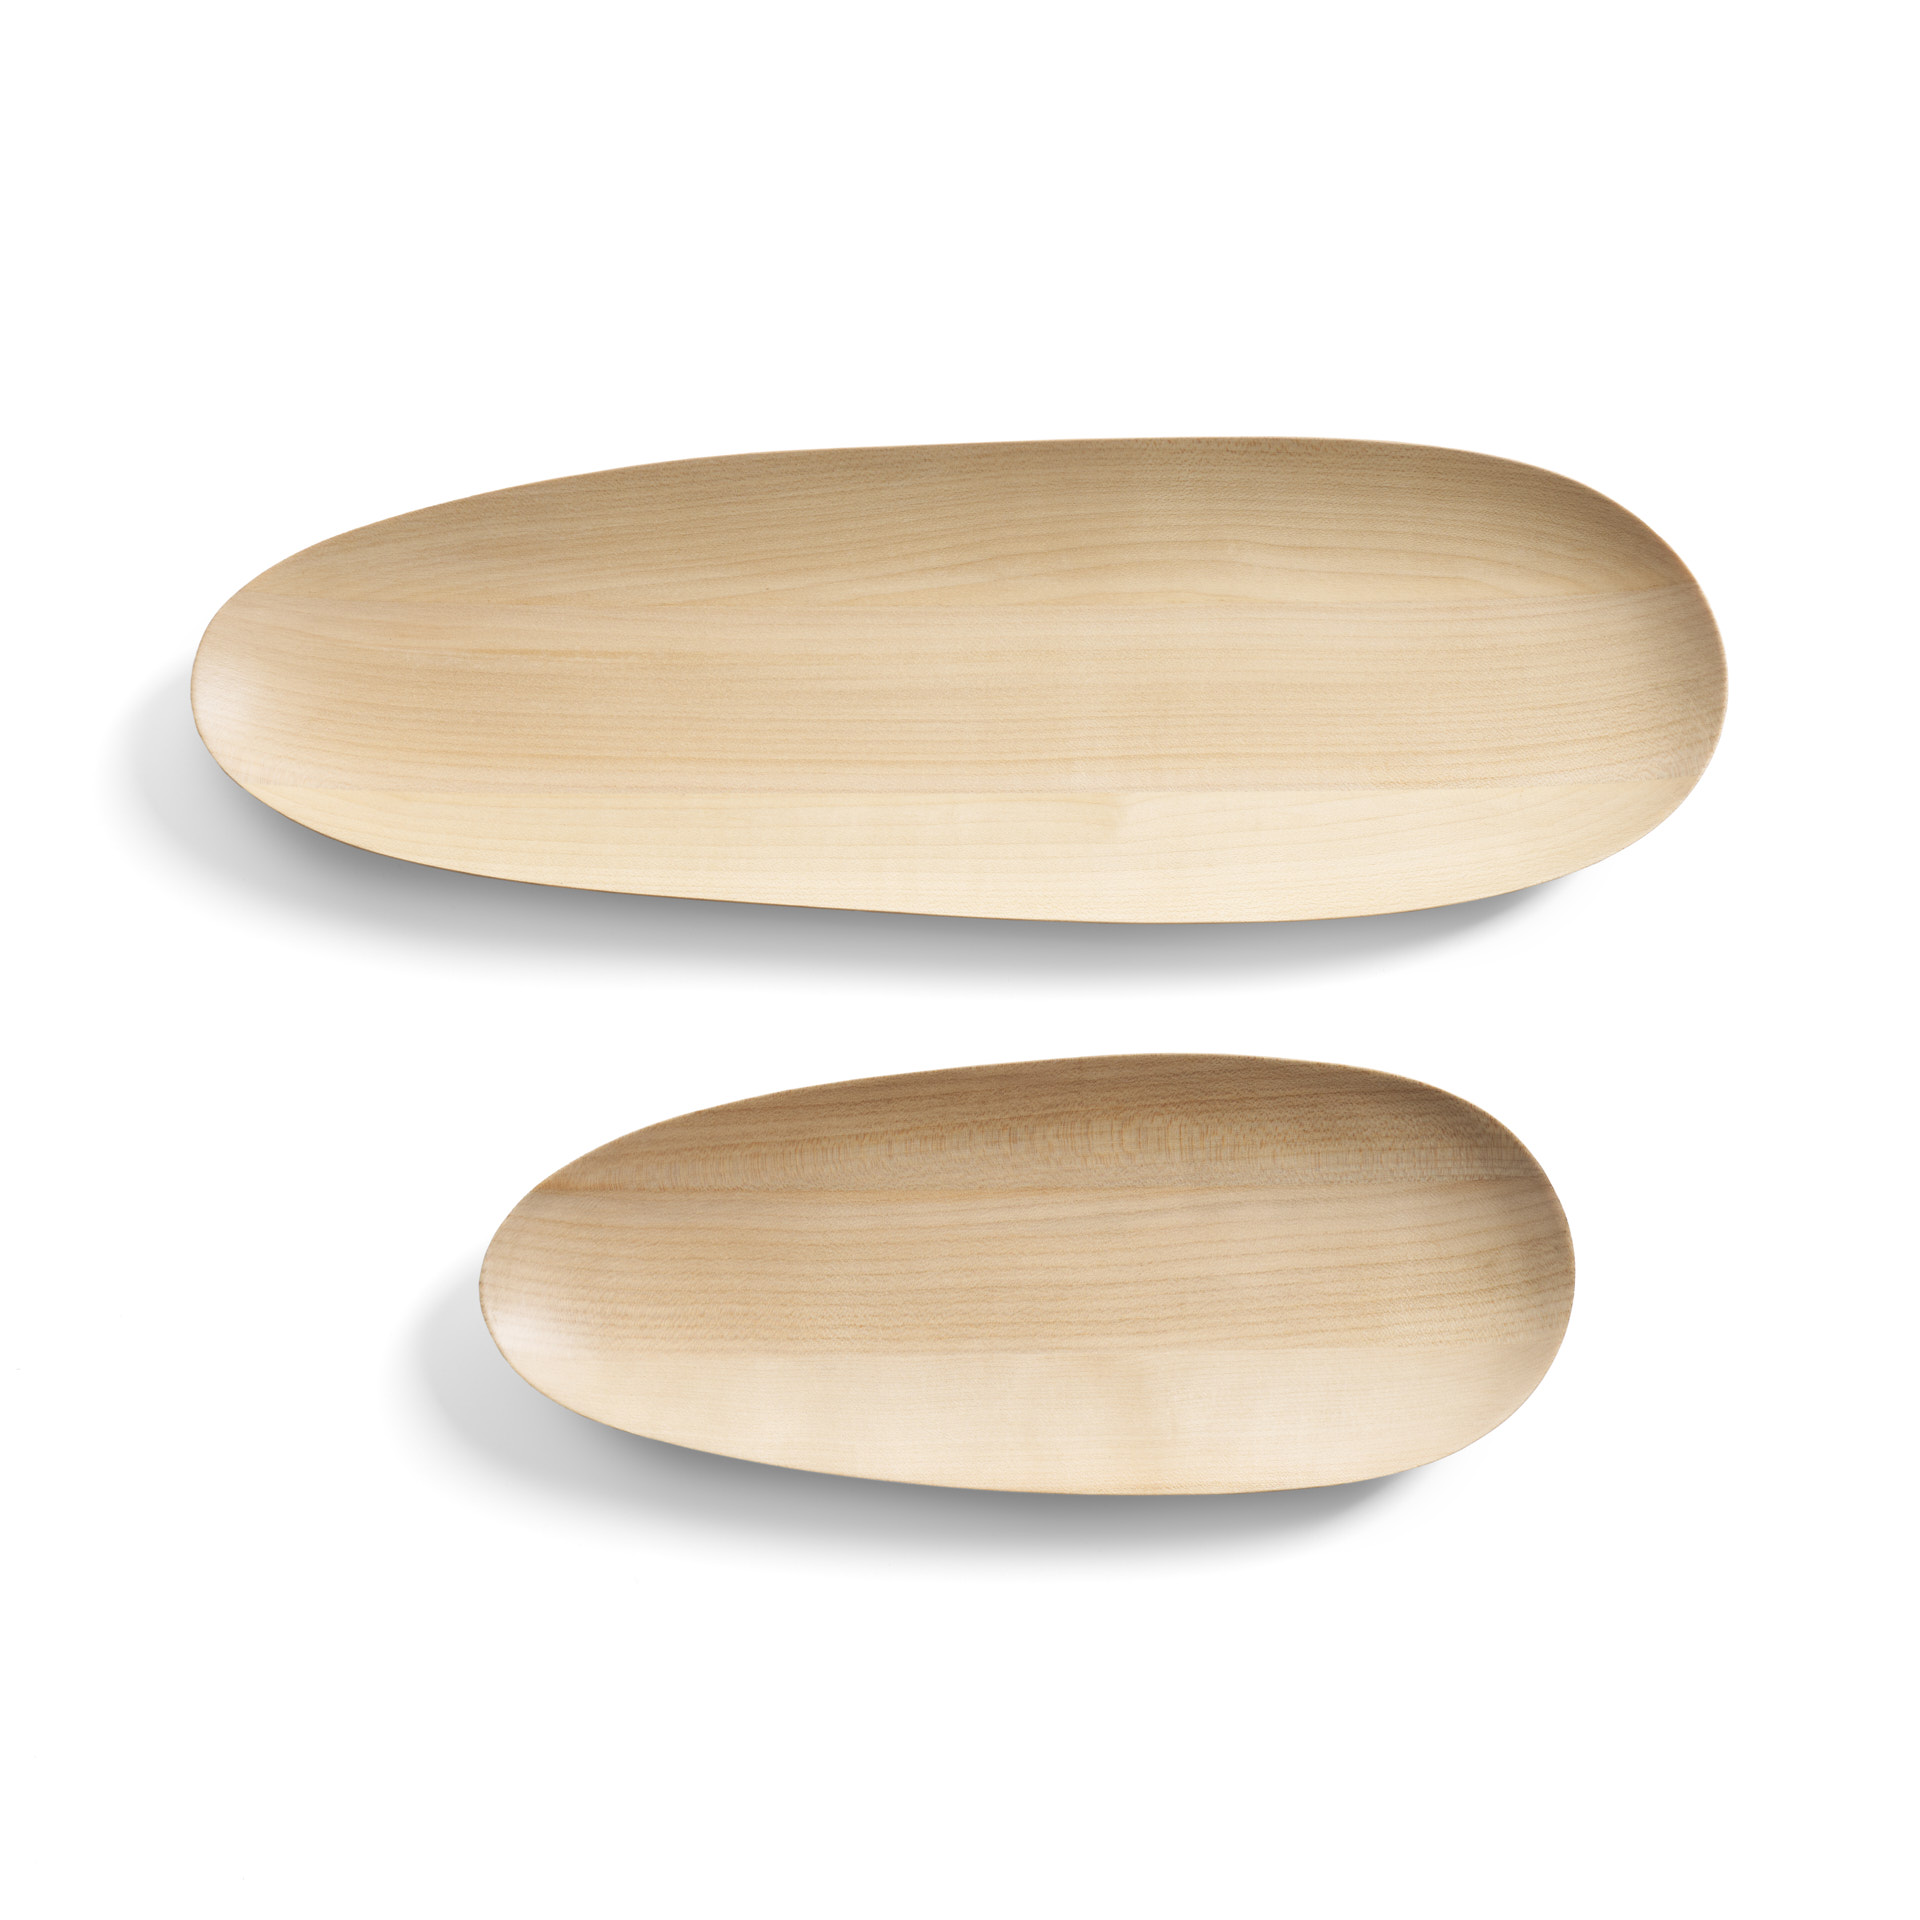 Thin_Oval_boards_sycamore_set_of_2_Ethnicraft